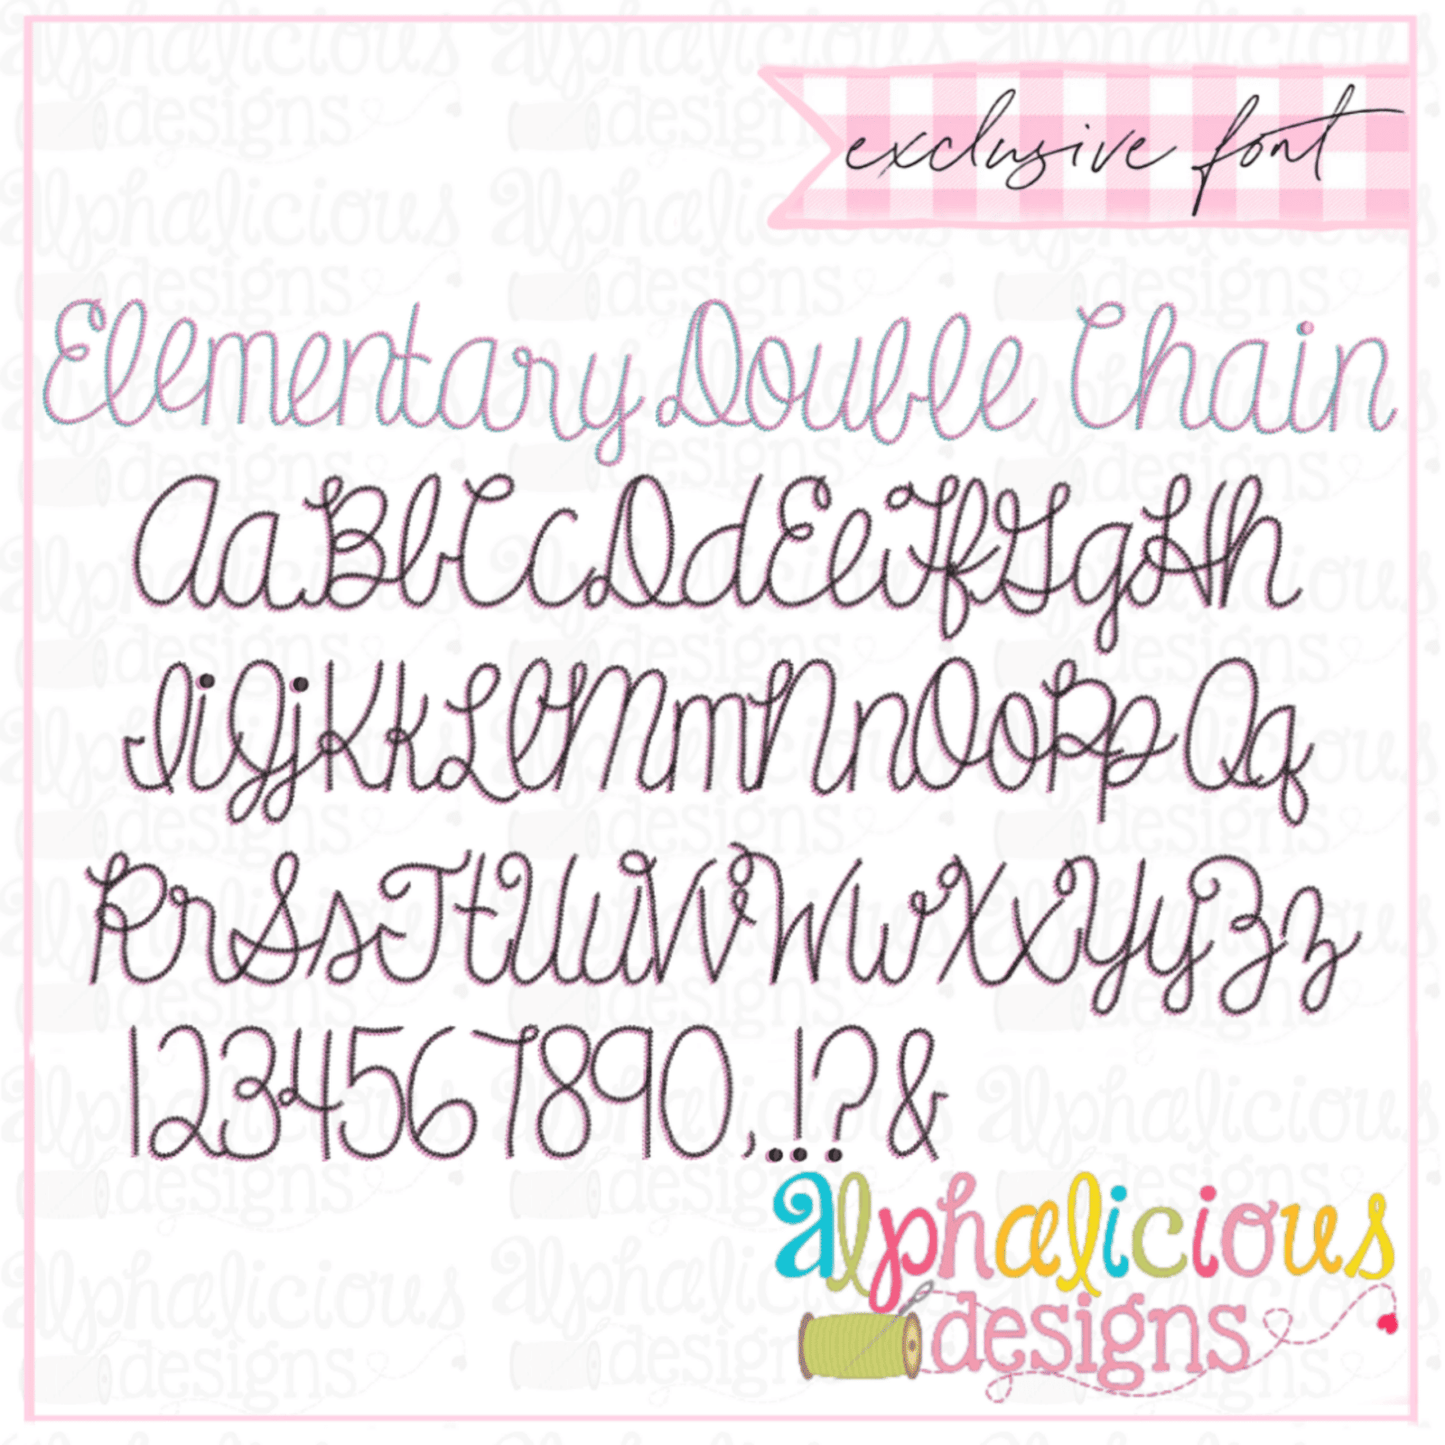 Elementary Chain Double Script Embroidery Font